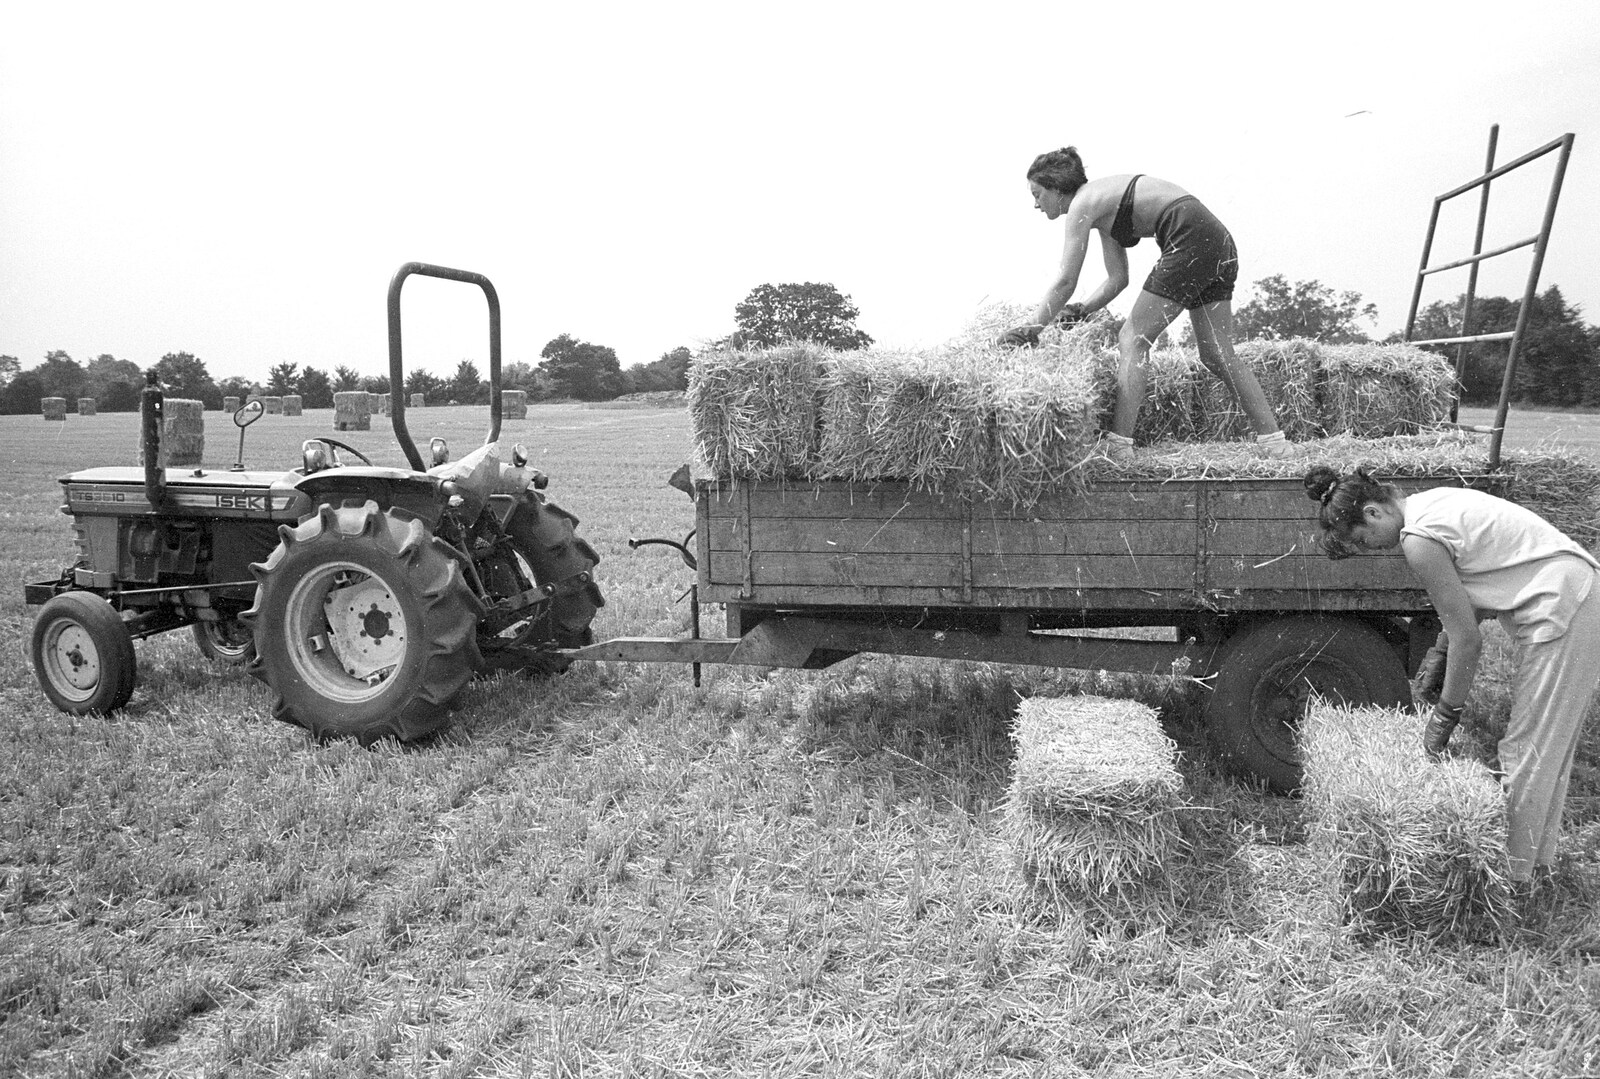 The second layer of bales on the trailer from Working on the Harvest, Tibenham, Norfolk - 11th August 1992